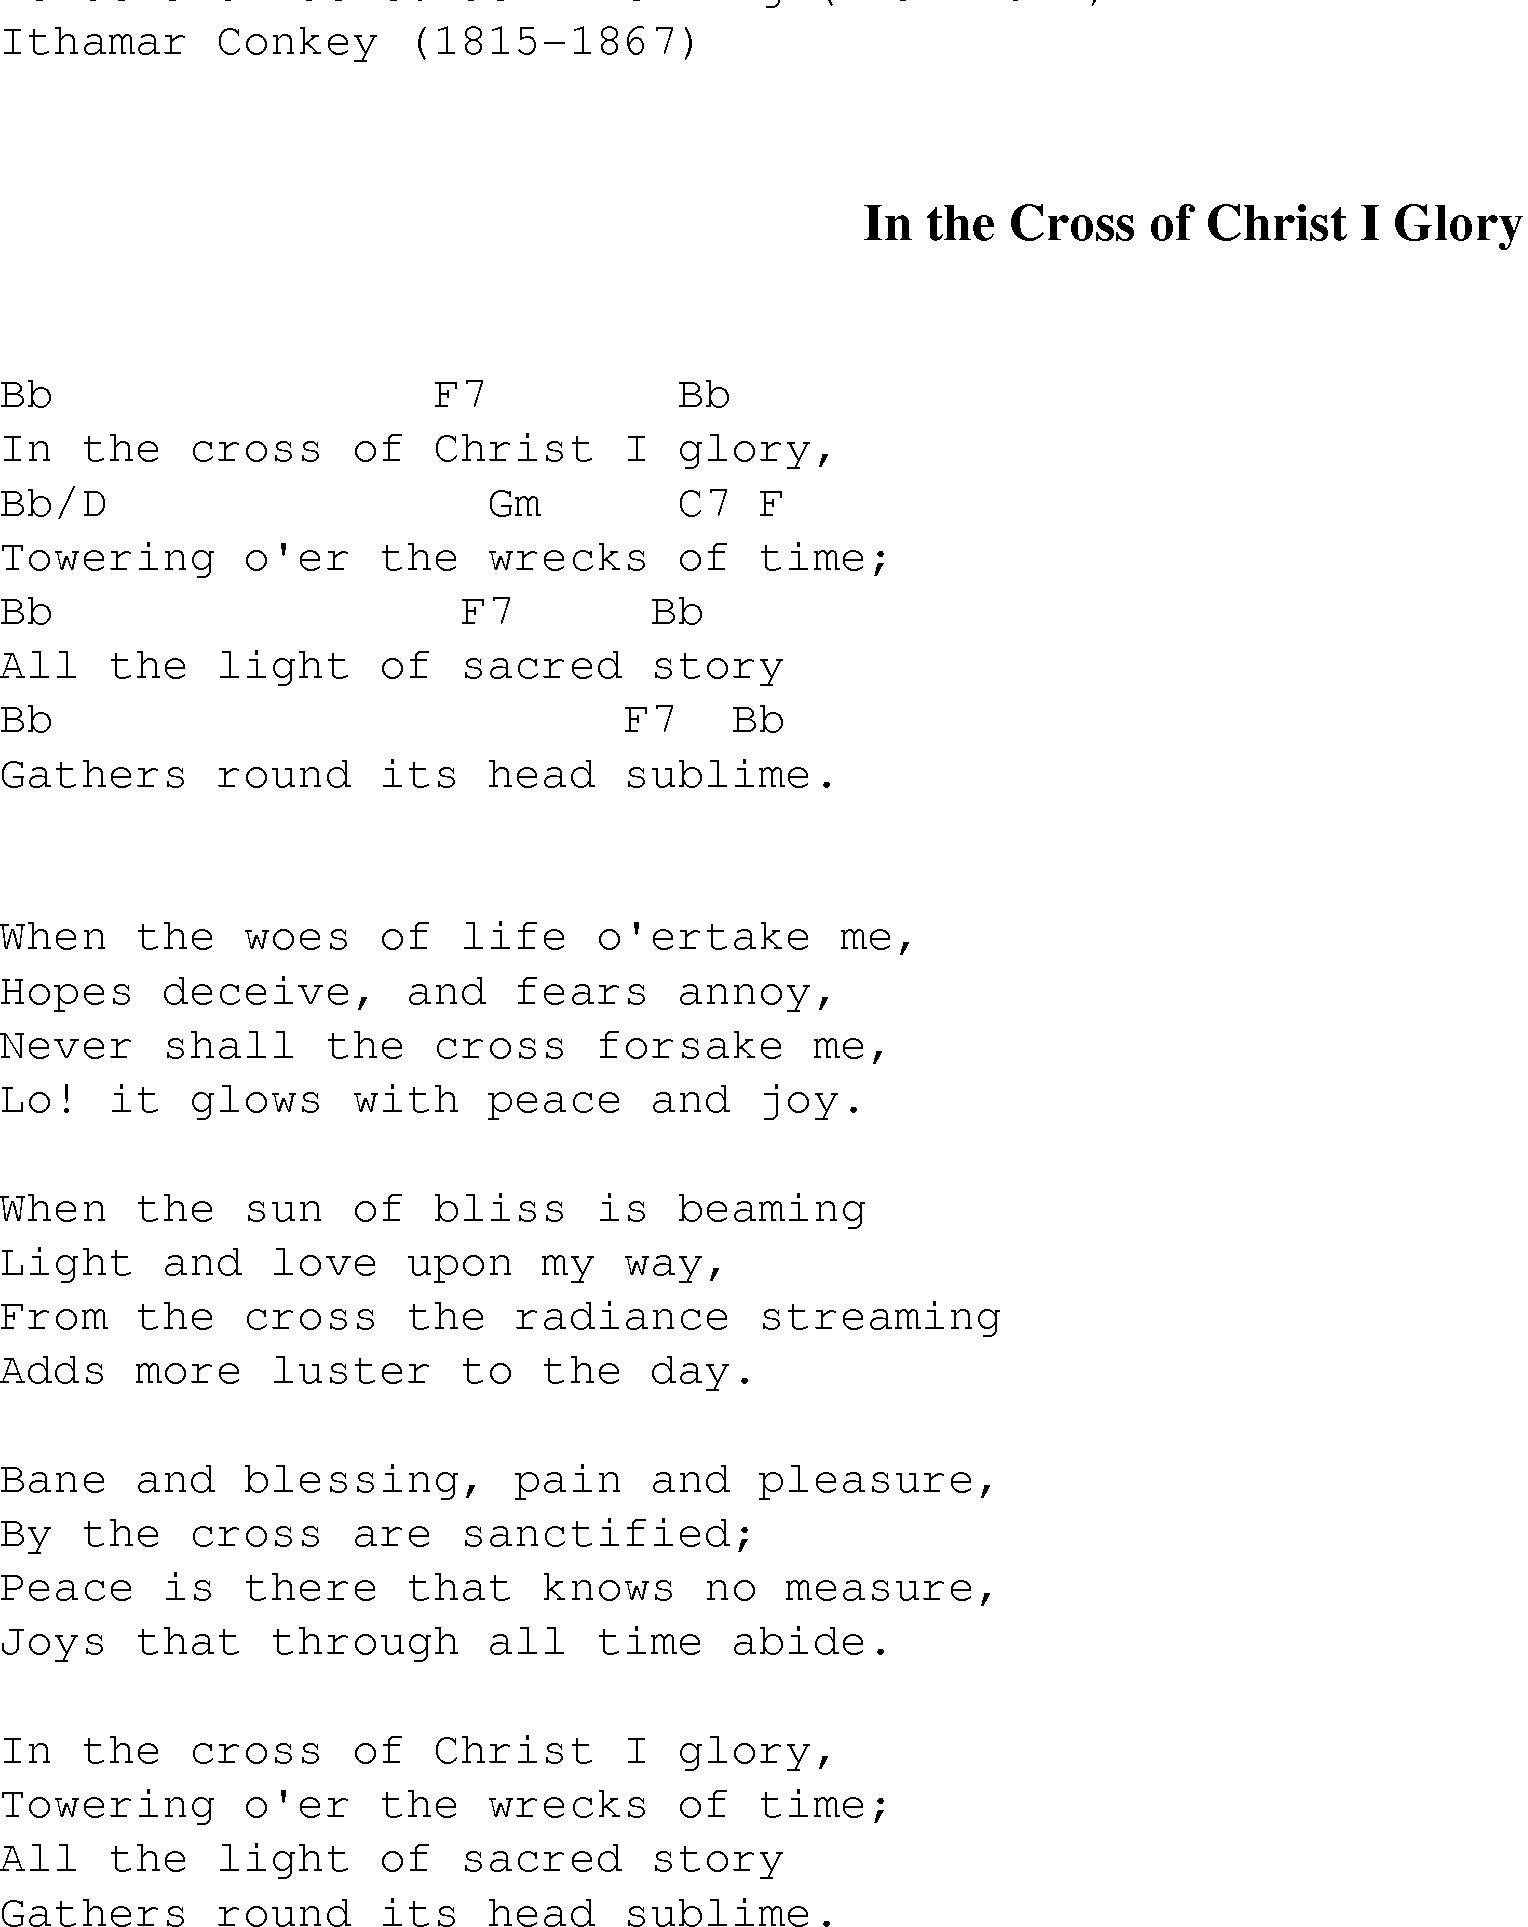 Gospel Song: in_the_cross_of_christ_i_glory, lyrics and chords.